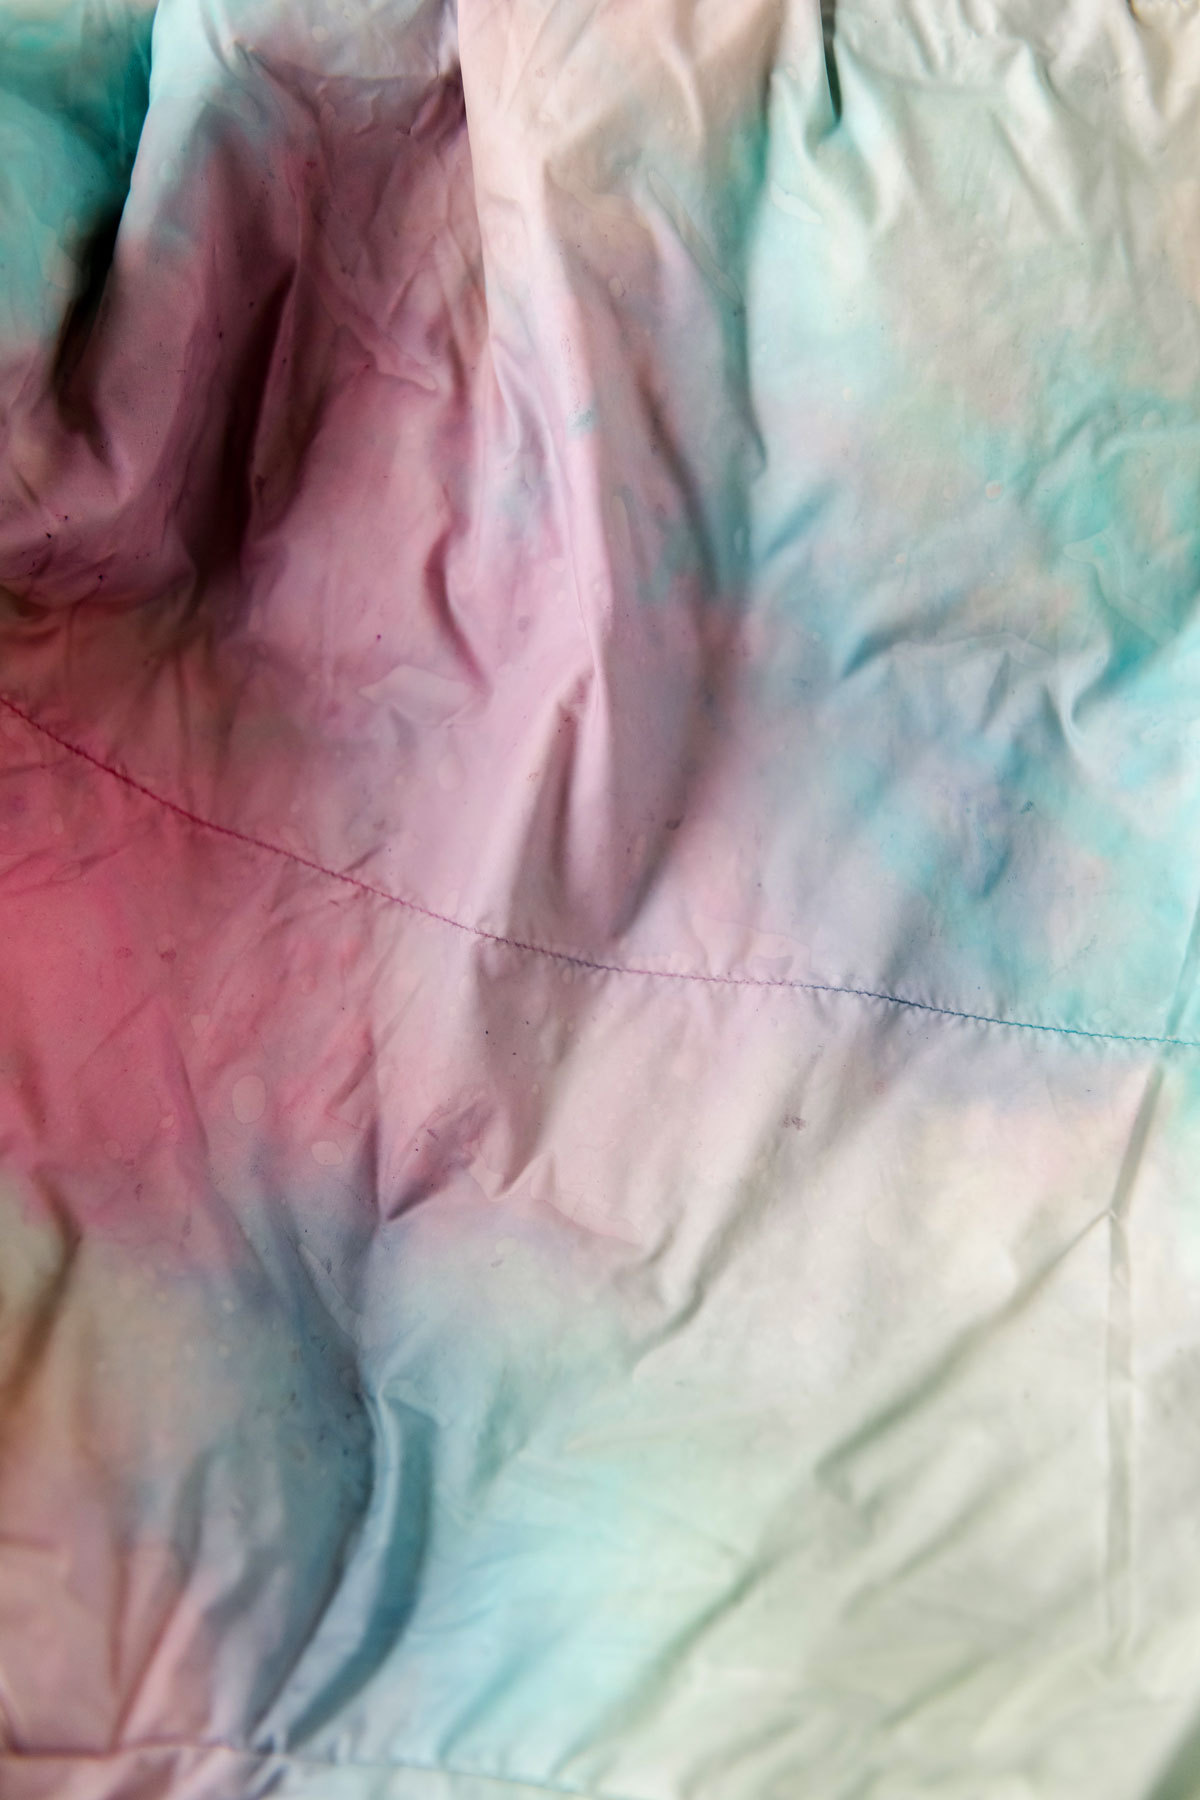 Watercolor tie dye jacket, how to do the watercolor tie dye effect, tie dye winter jacket, watercolor tie dye winter coat DIY, winter coat tie dye DIY